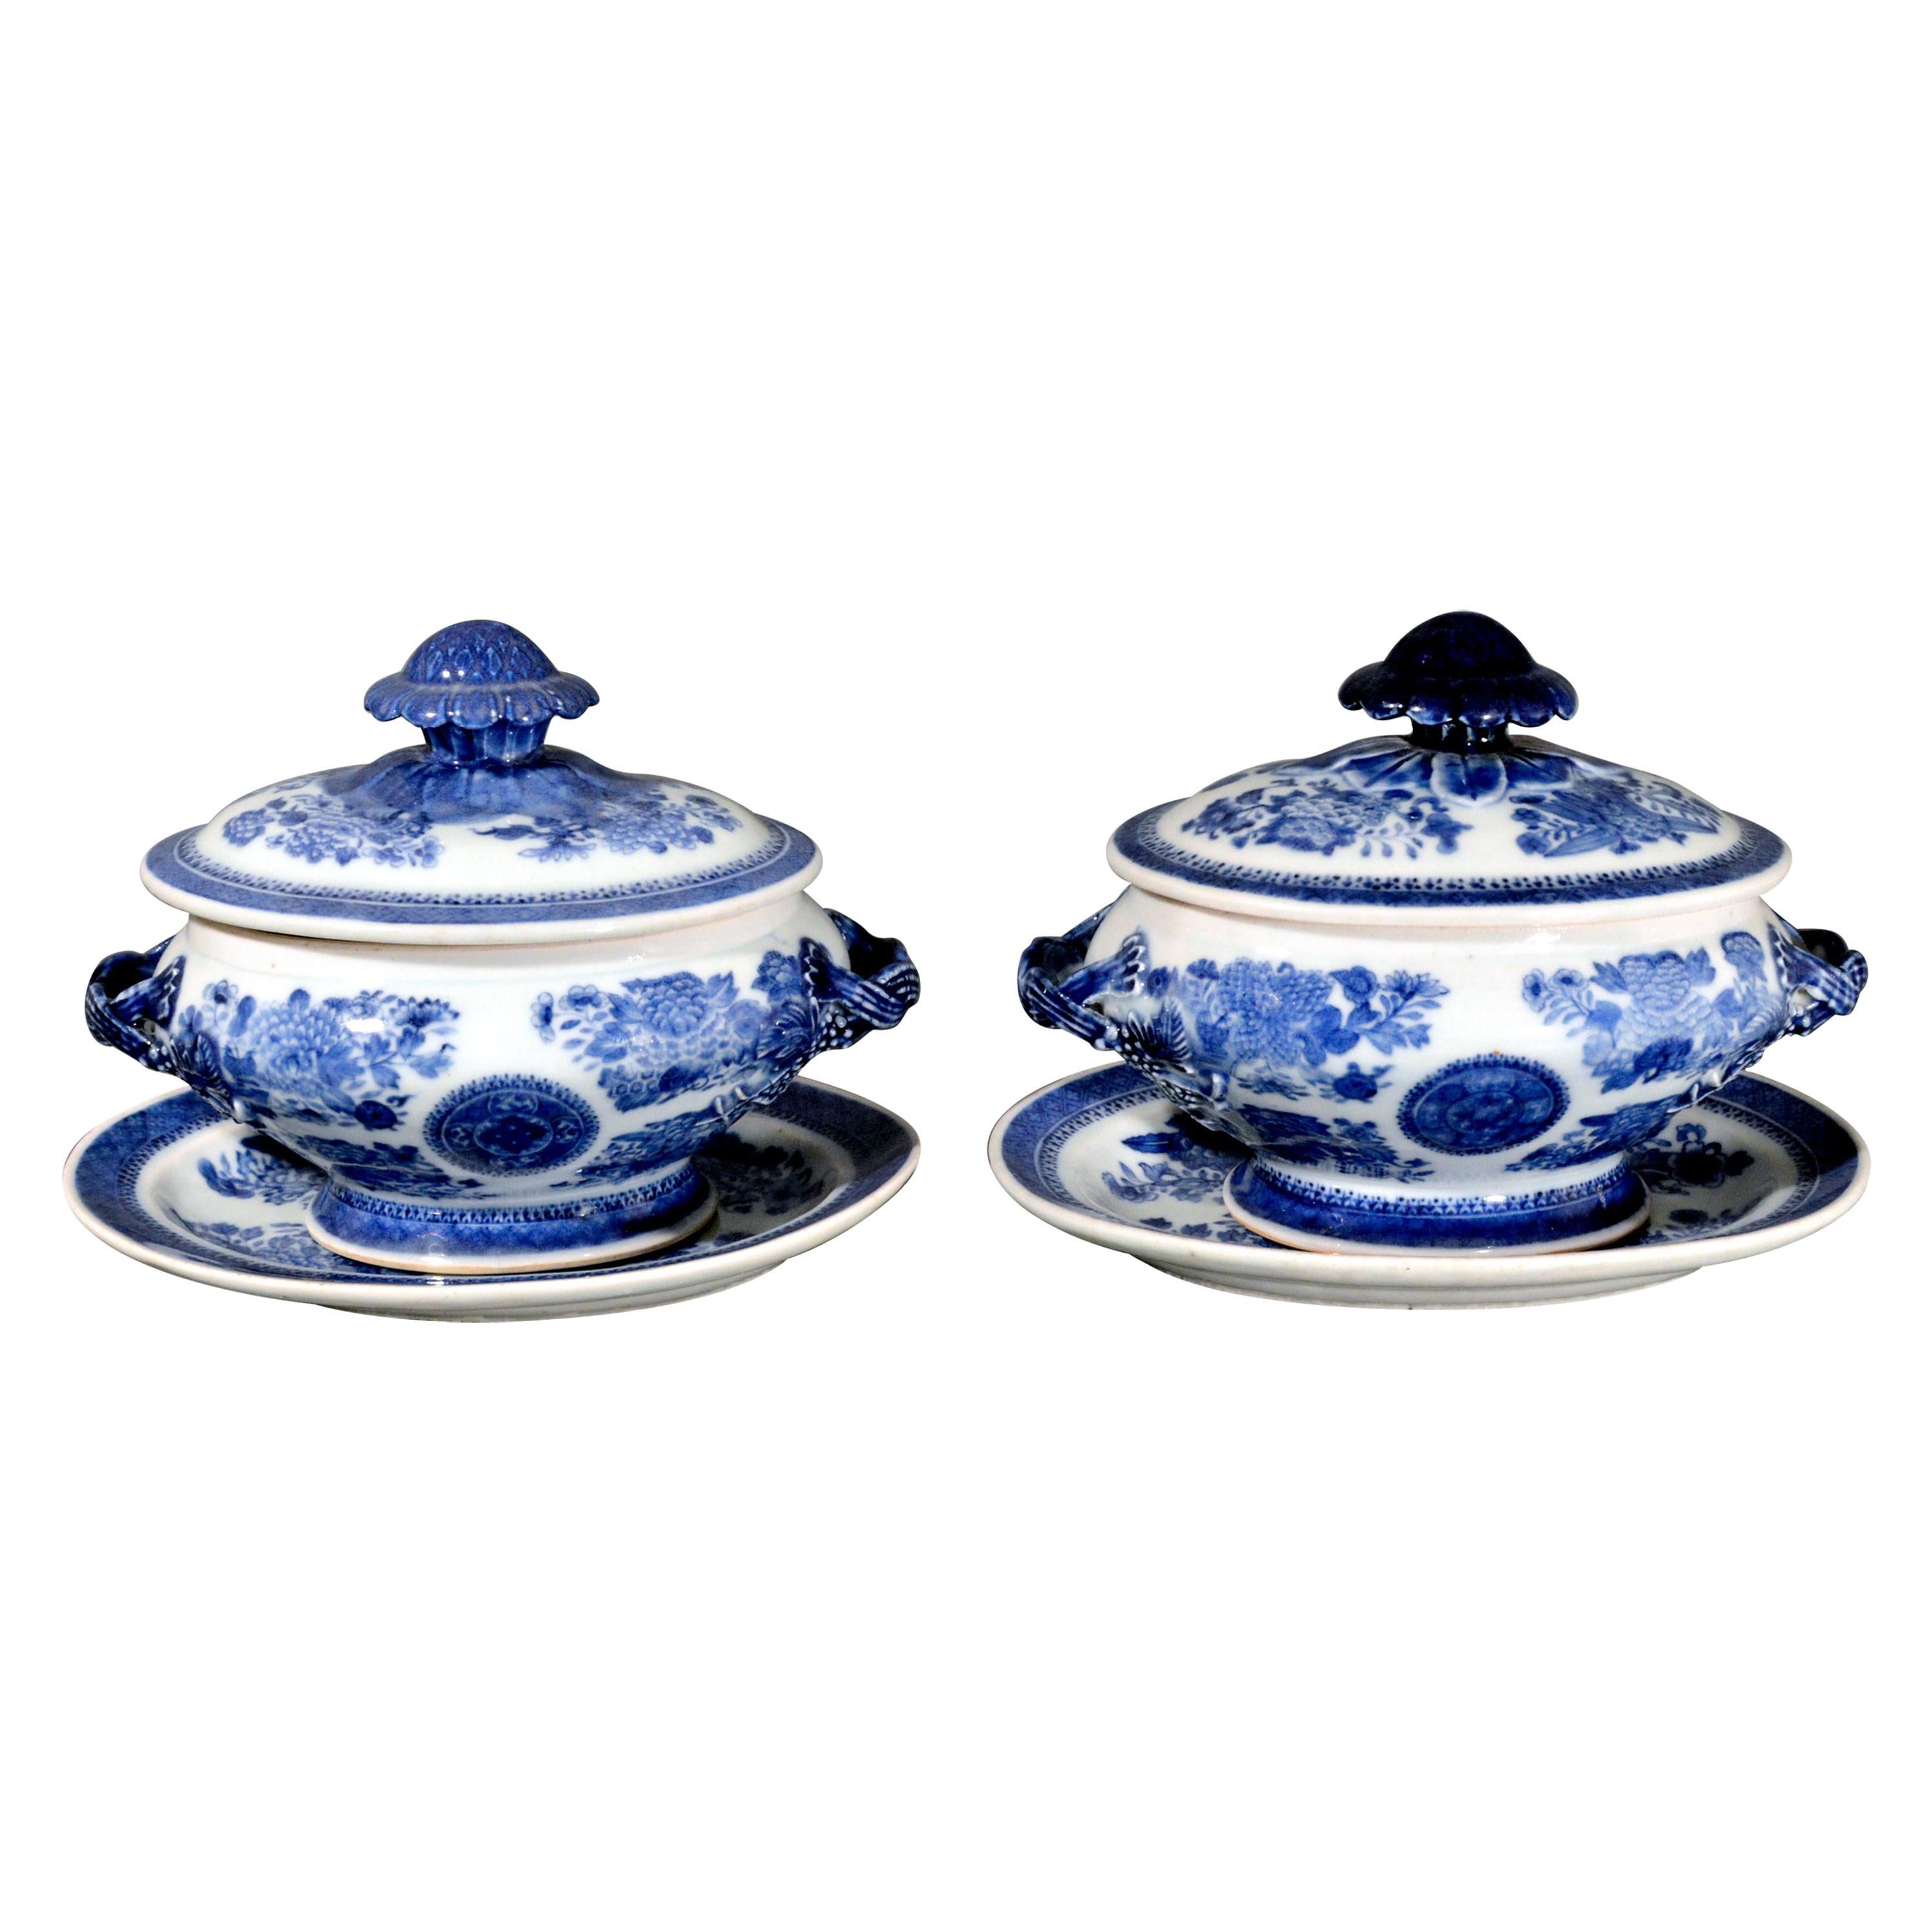 Chinese Export Porcelain Blue Fitzhugh Sauce Tureens, Covers & Stands For Sale